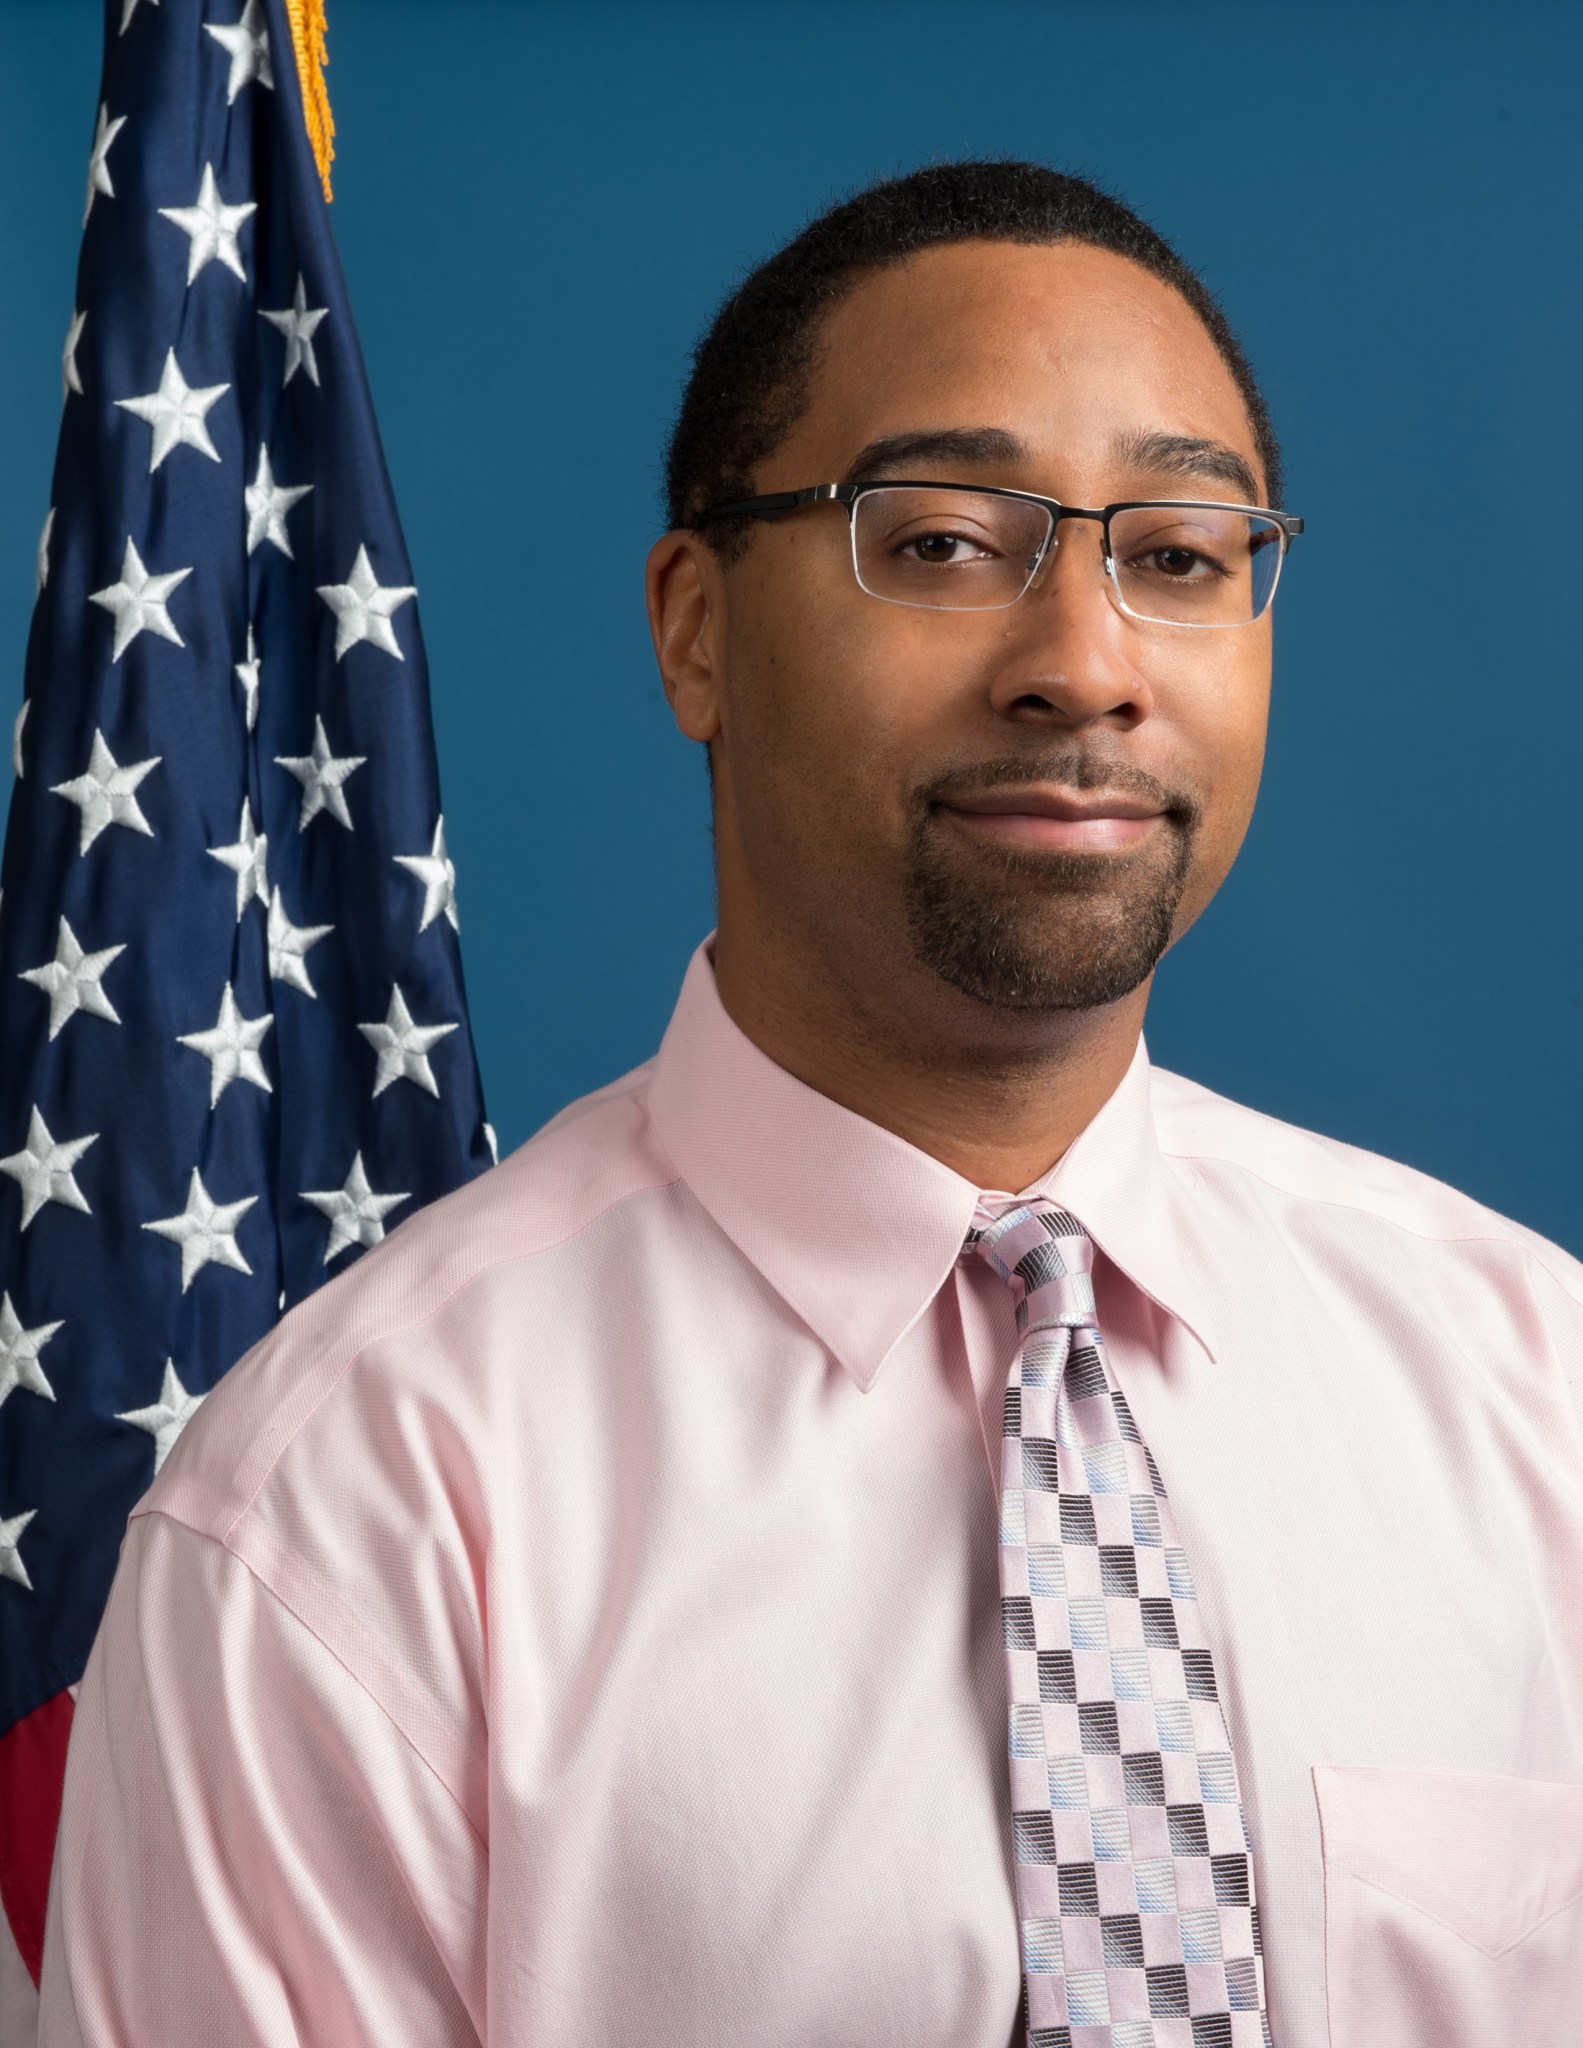 A Black man with short black hair wears glasses, a pink shirt, and pink and grey tie. He smiles against a blue background with the American flag on the left. 